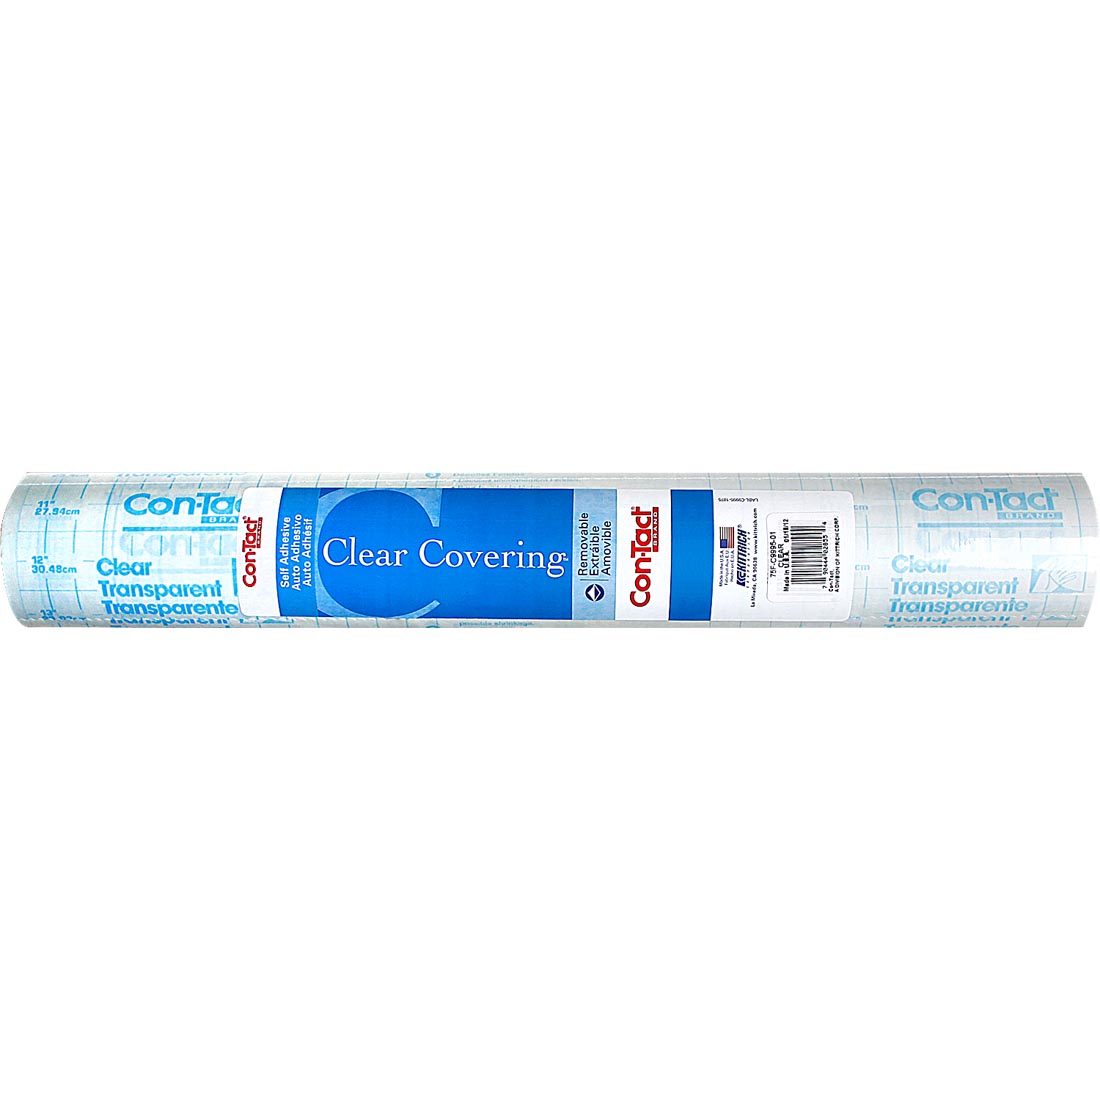 Con-Tact Brand Clear Covering Film Roll